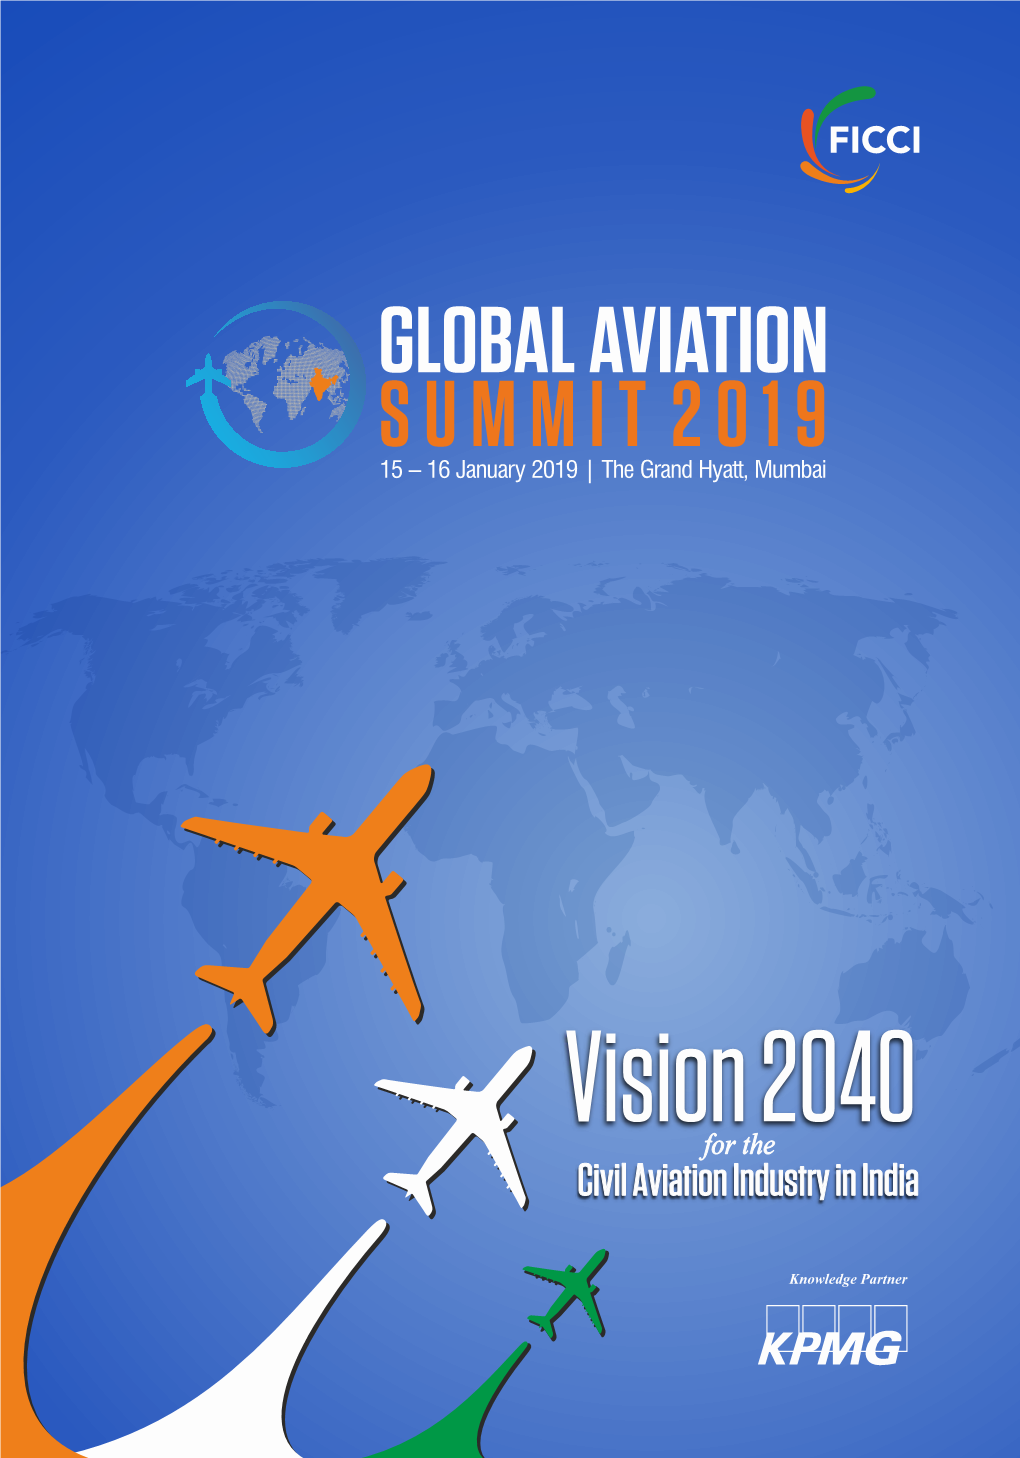 Vision 2040 for the Civil Aviation Industry in India